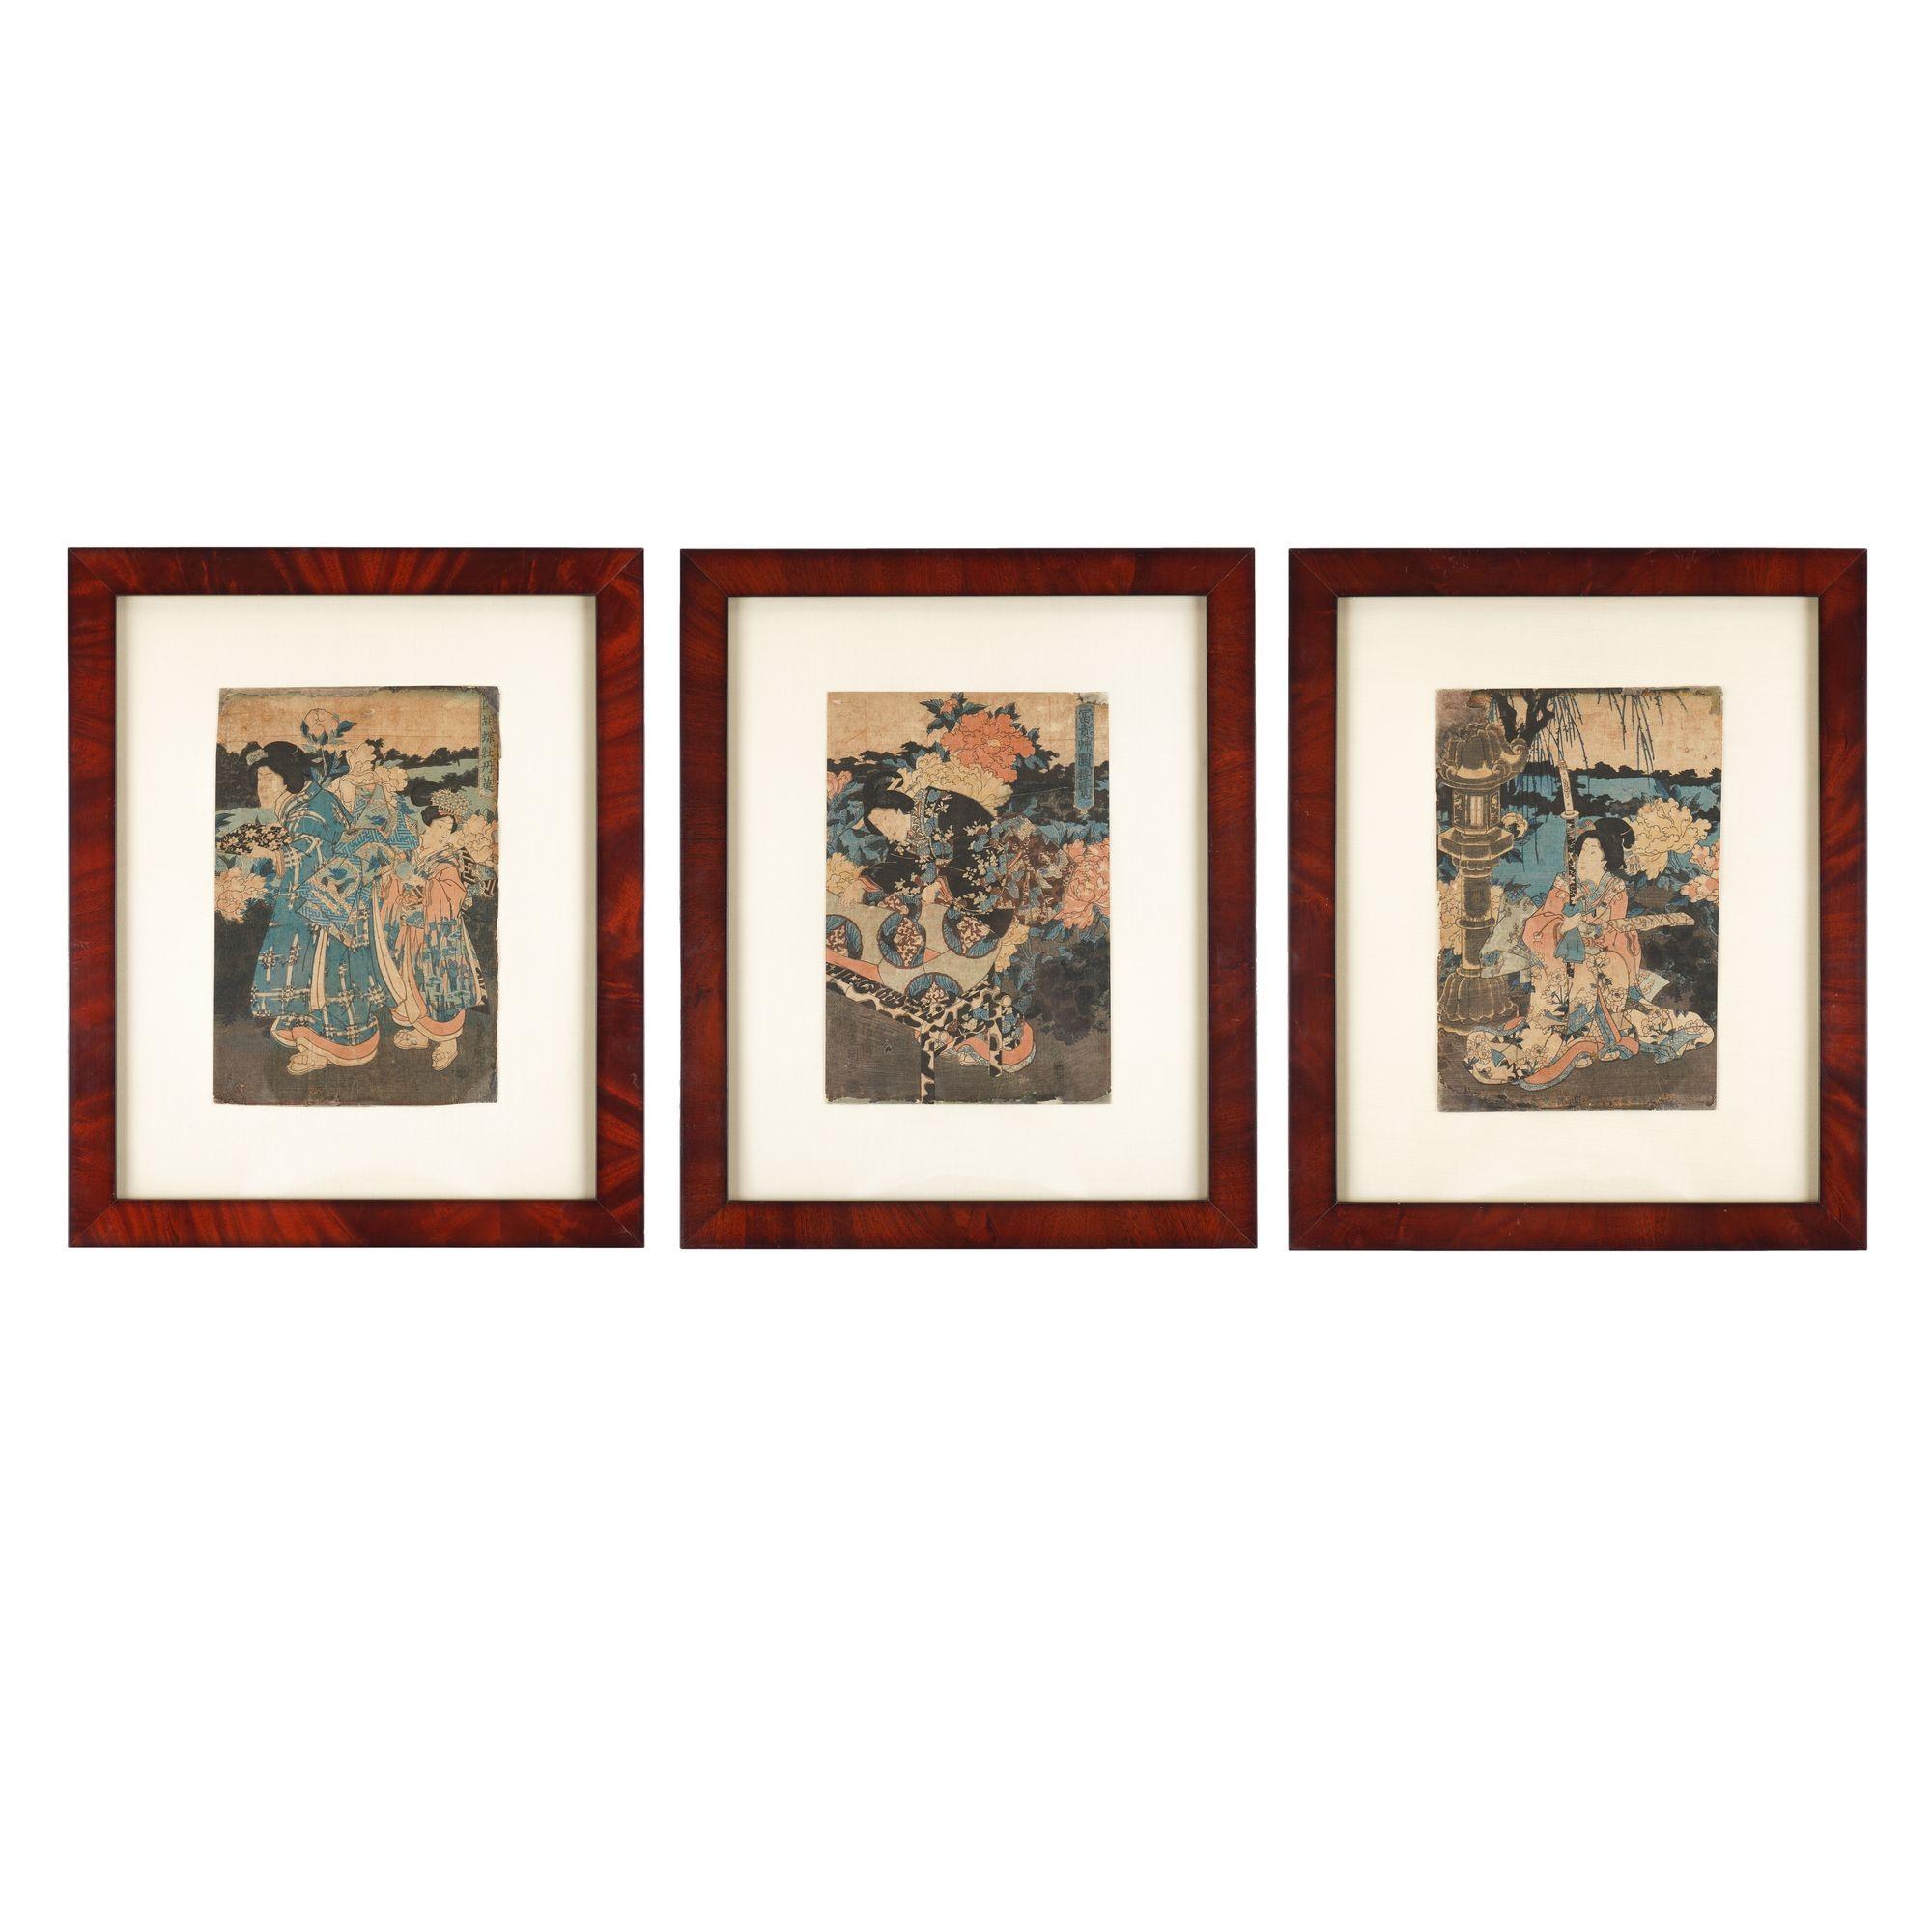 Japanese woodblock triptych by Utagawa Toyokuni printed on rice paper in the Ukiyo-e style. Theses richly patterned images are of Kabuki theater actors. All works are archival mounted with silk mats under UV acrylic and framed in matched